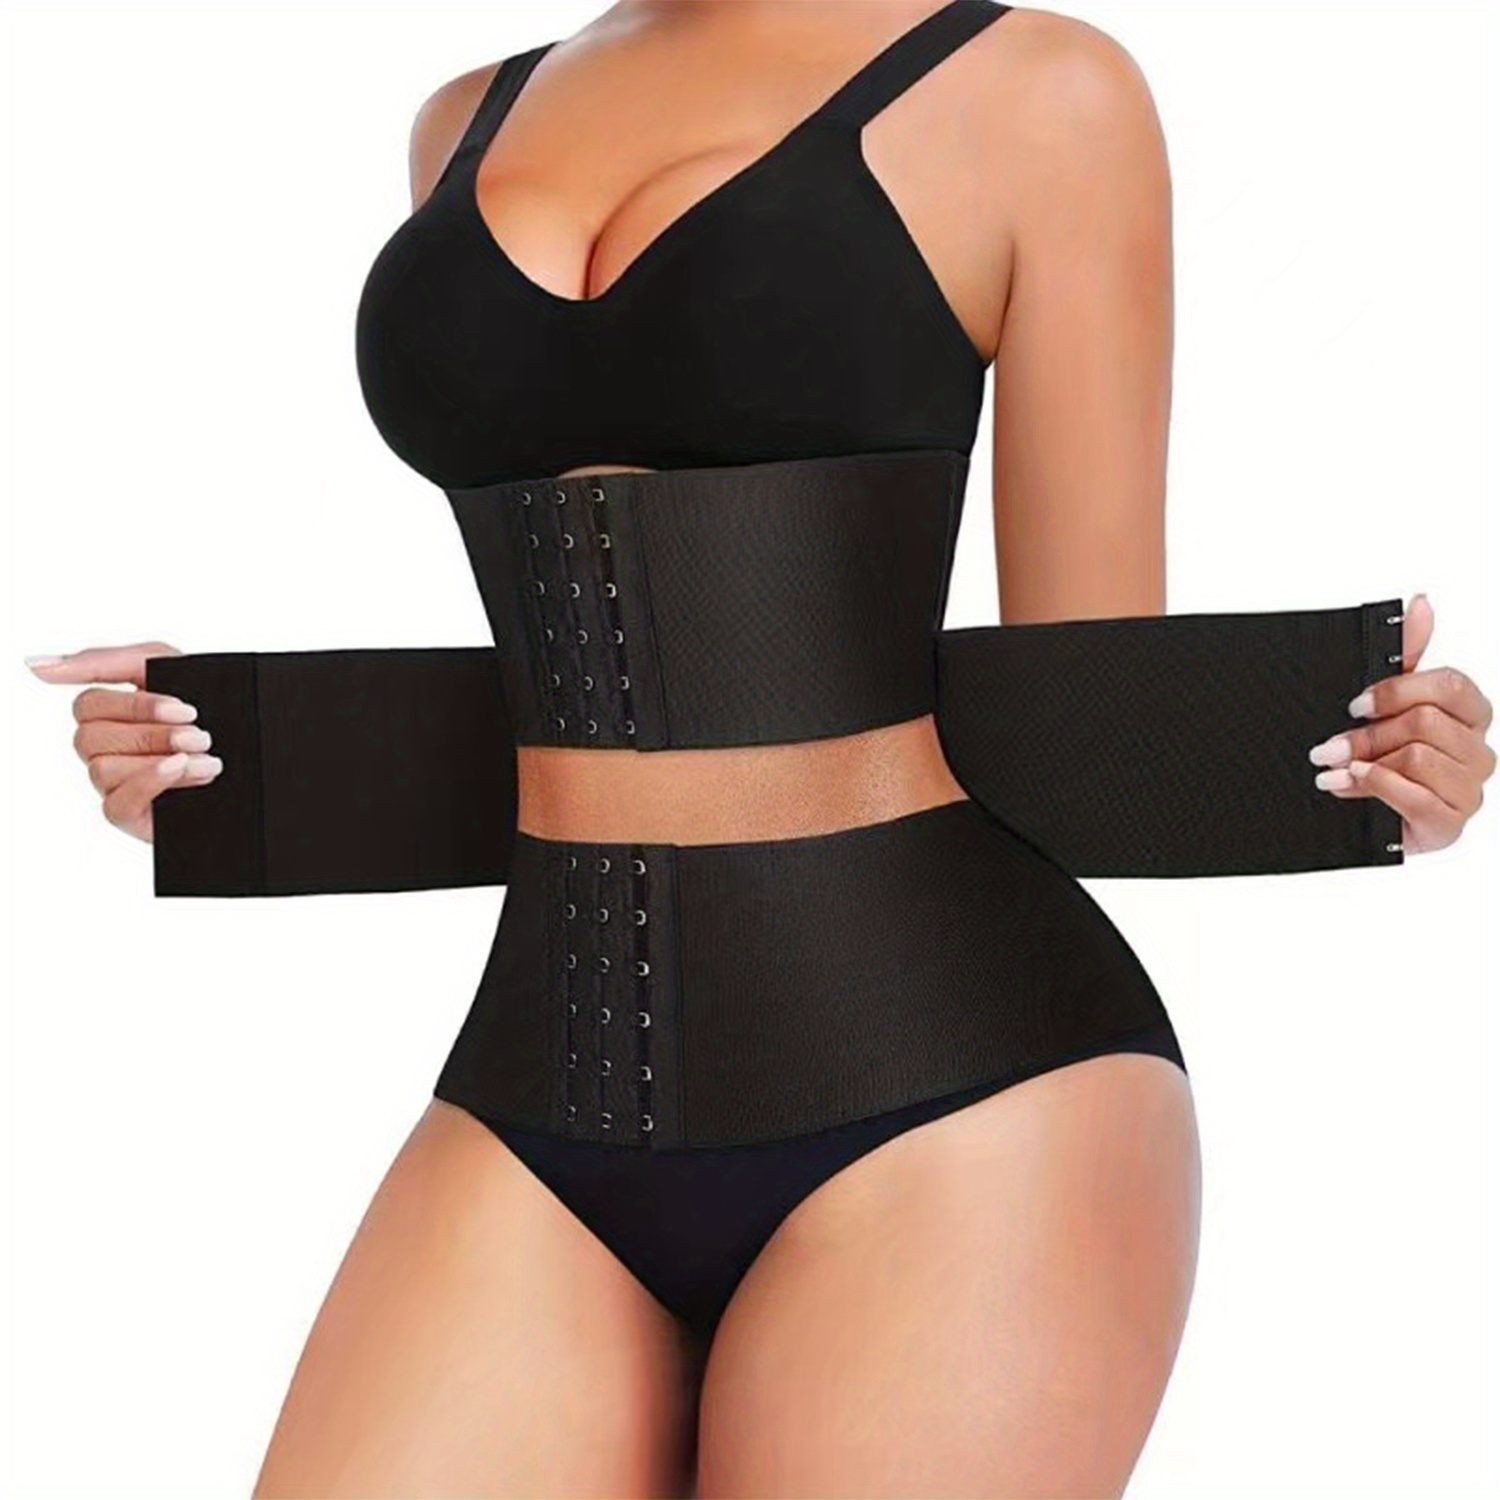 Steel Bone Waist Trainer Cinch Belt - Tummy Control Shapewear for Yoga,  Fitness, and Weight Loss - Large Size Exercise Equipment